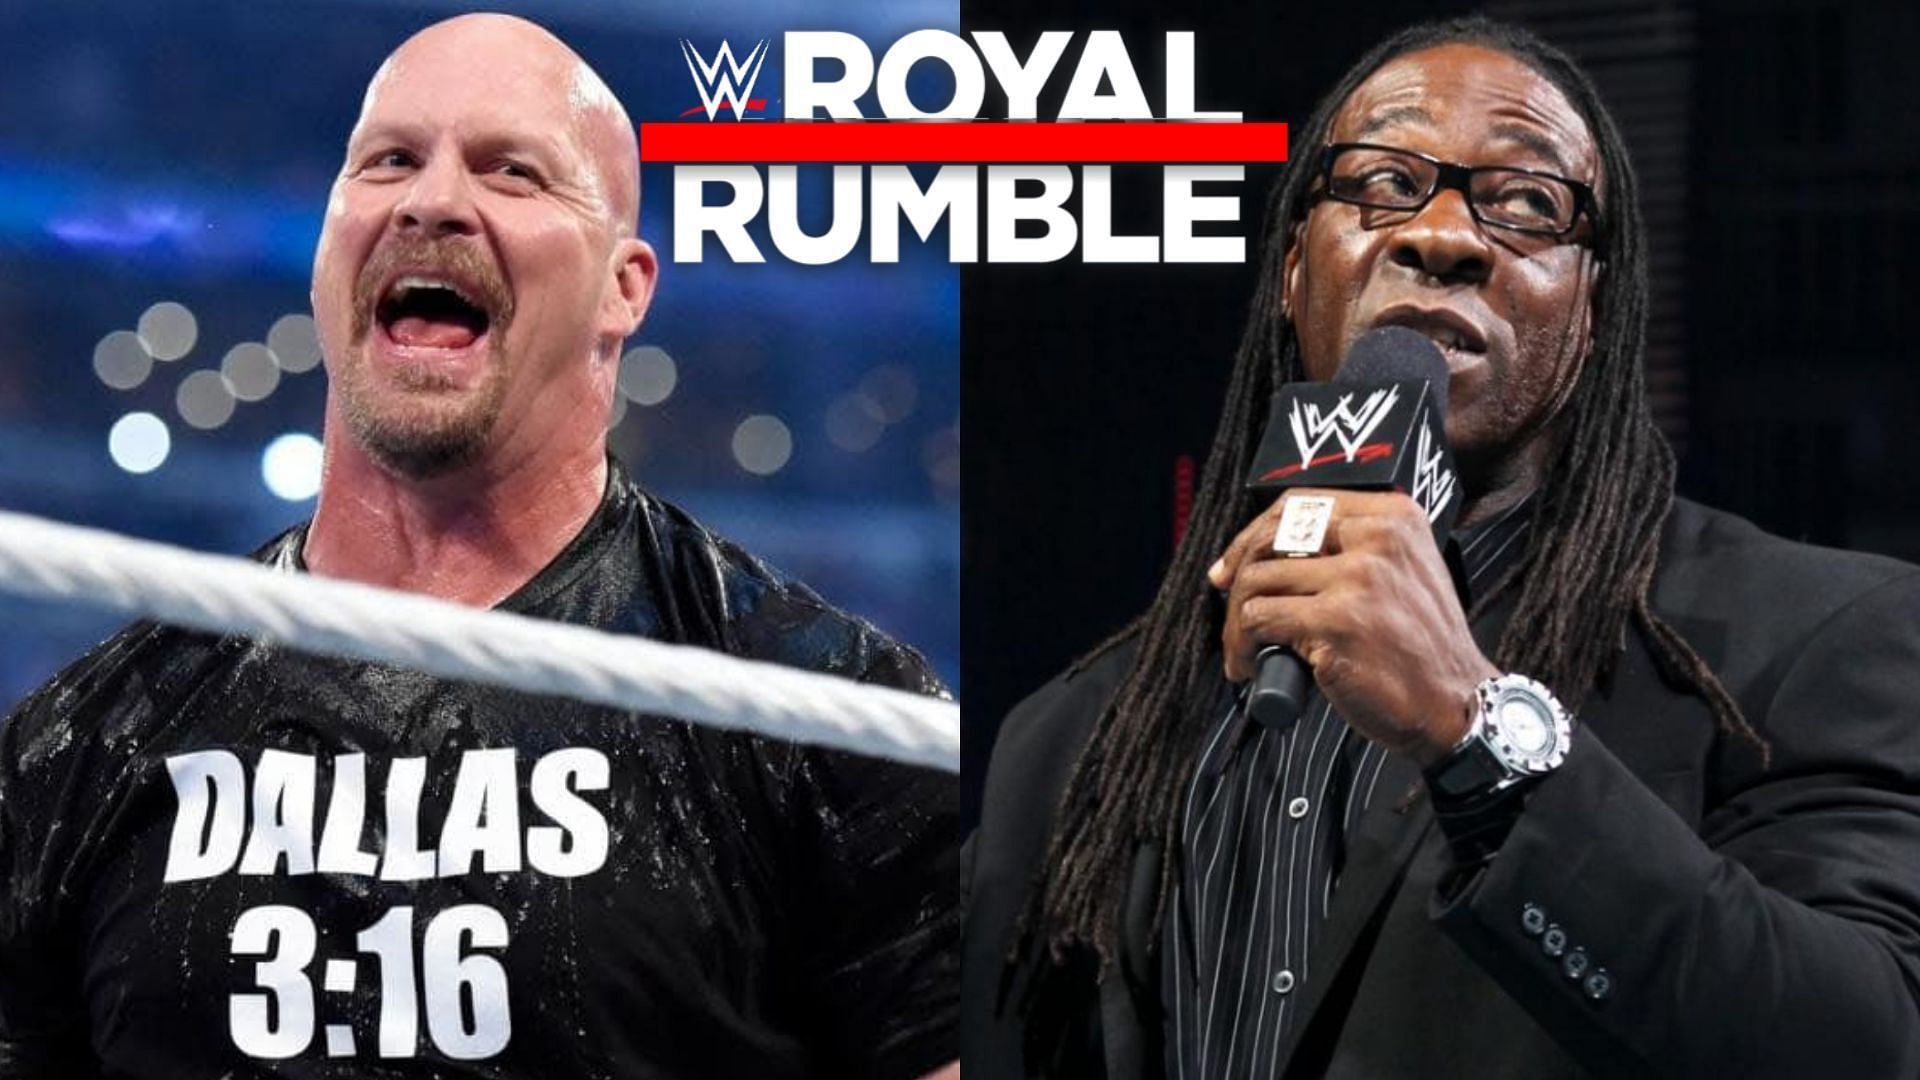 The Royal Rumble will be held in Texas this year